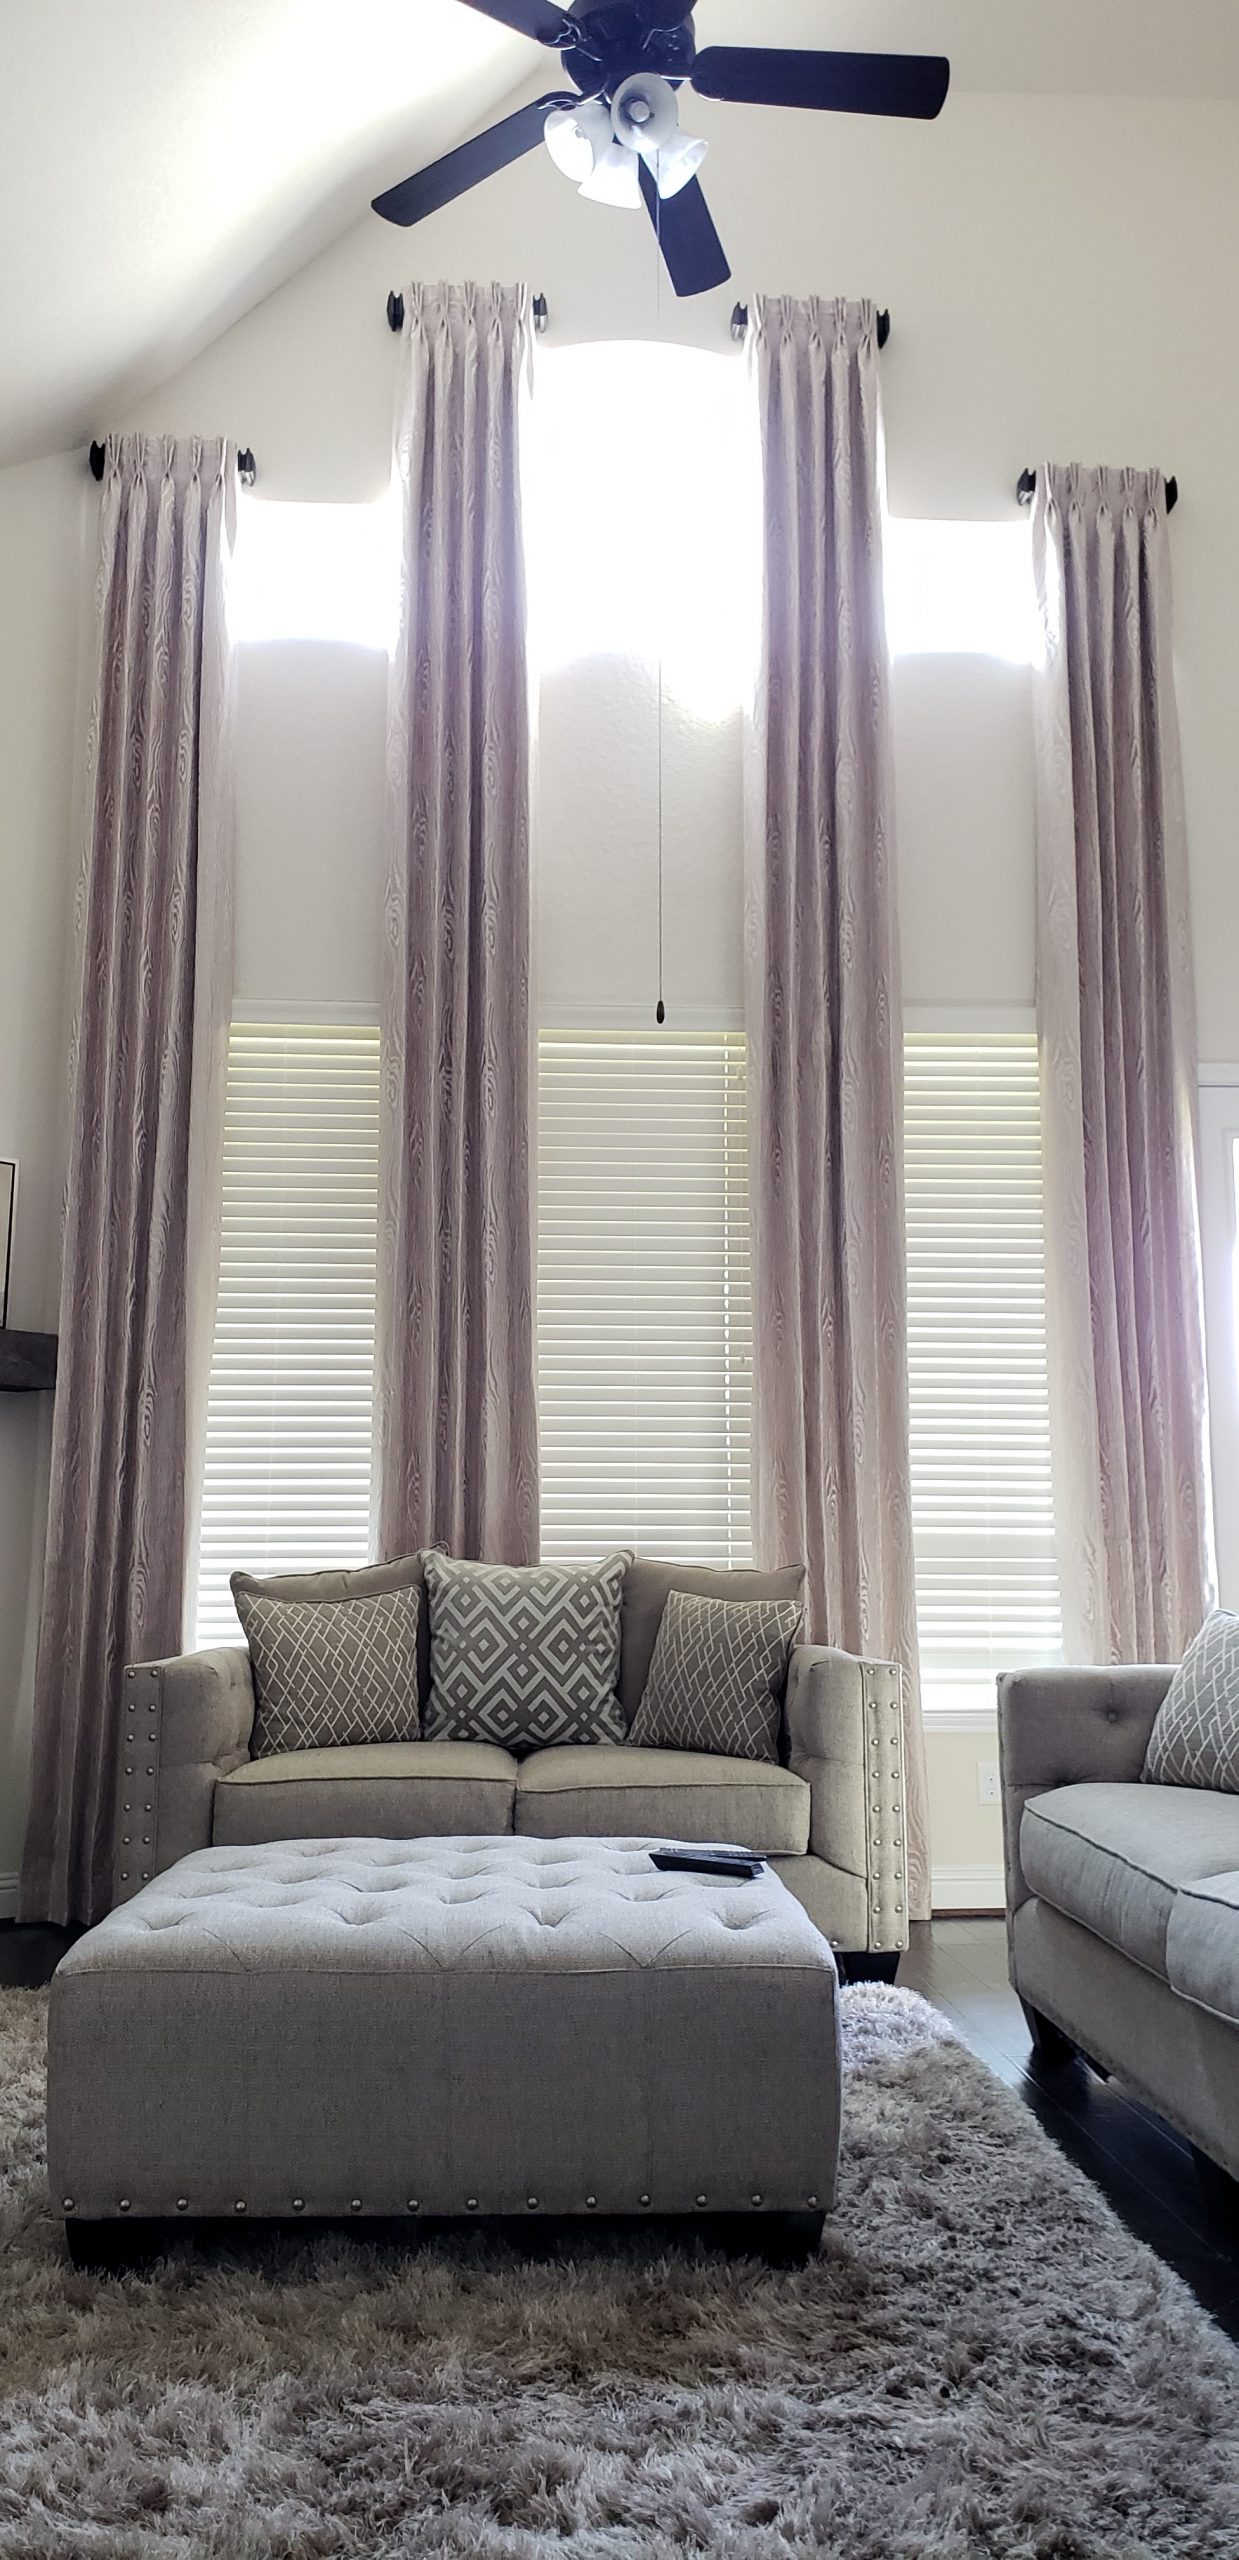 Board mounted multi-level pinch pleated panels with accent finials